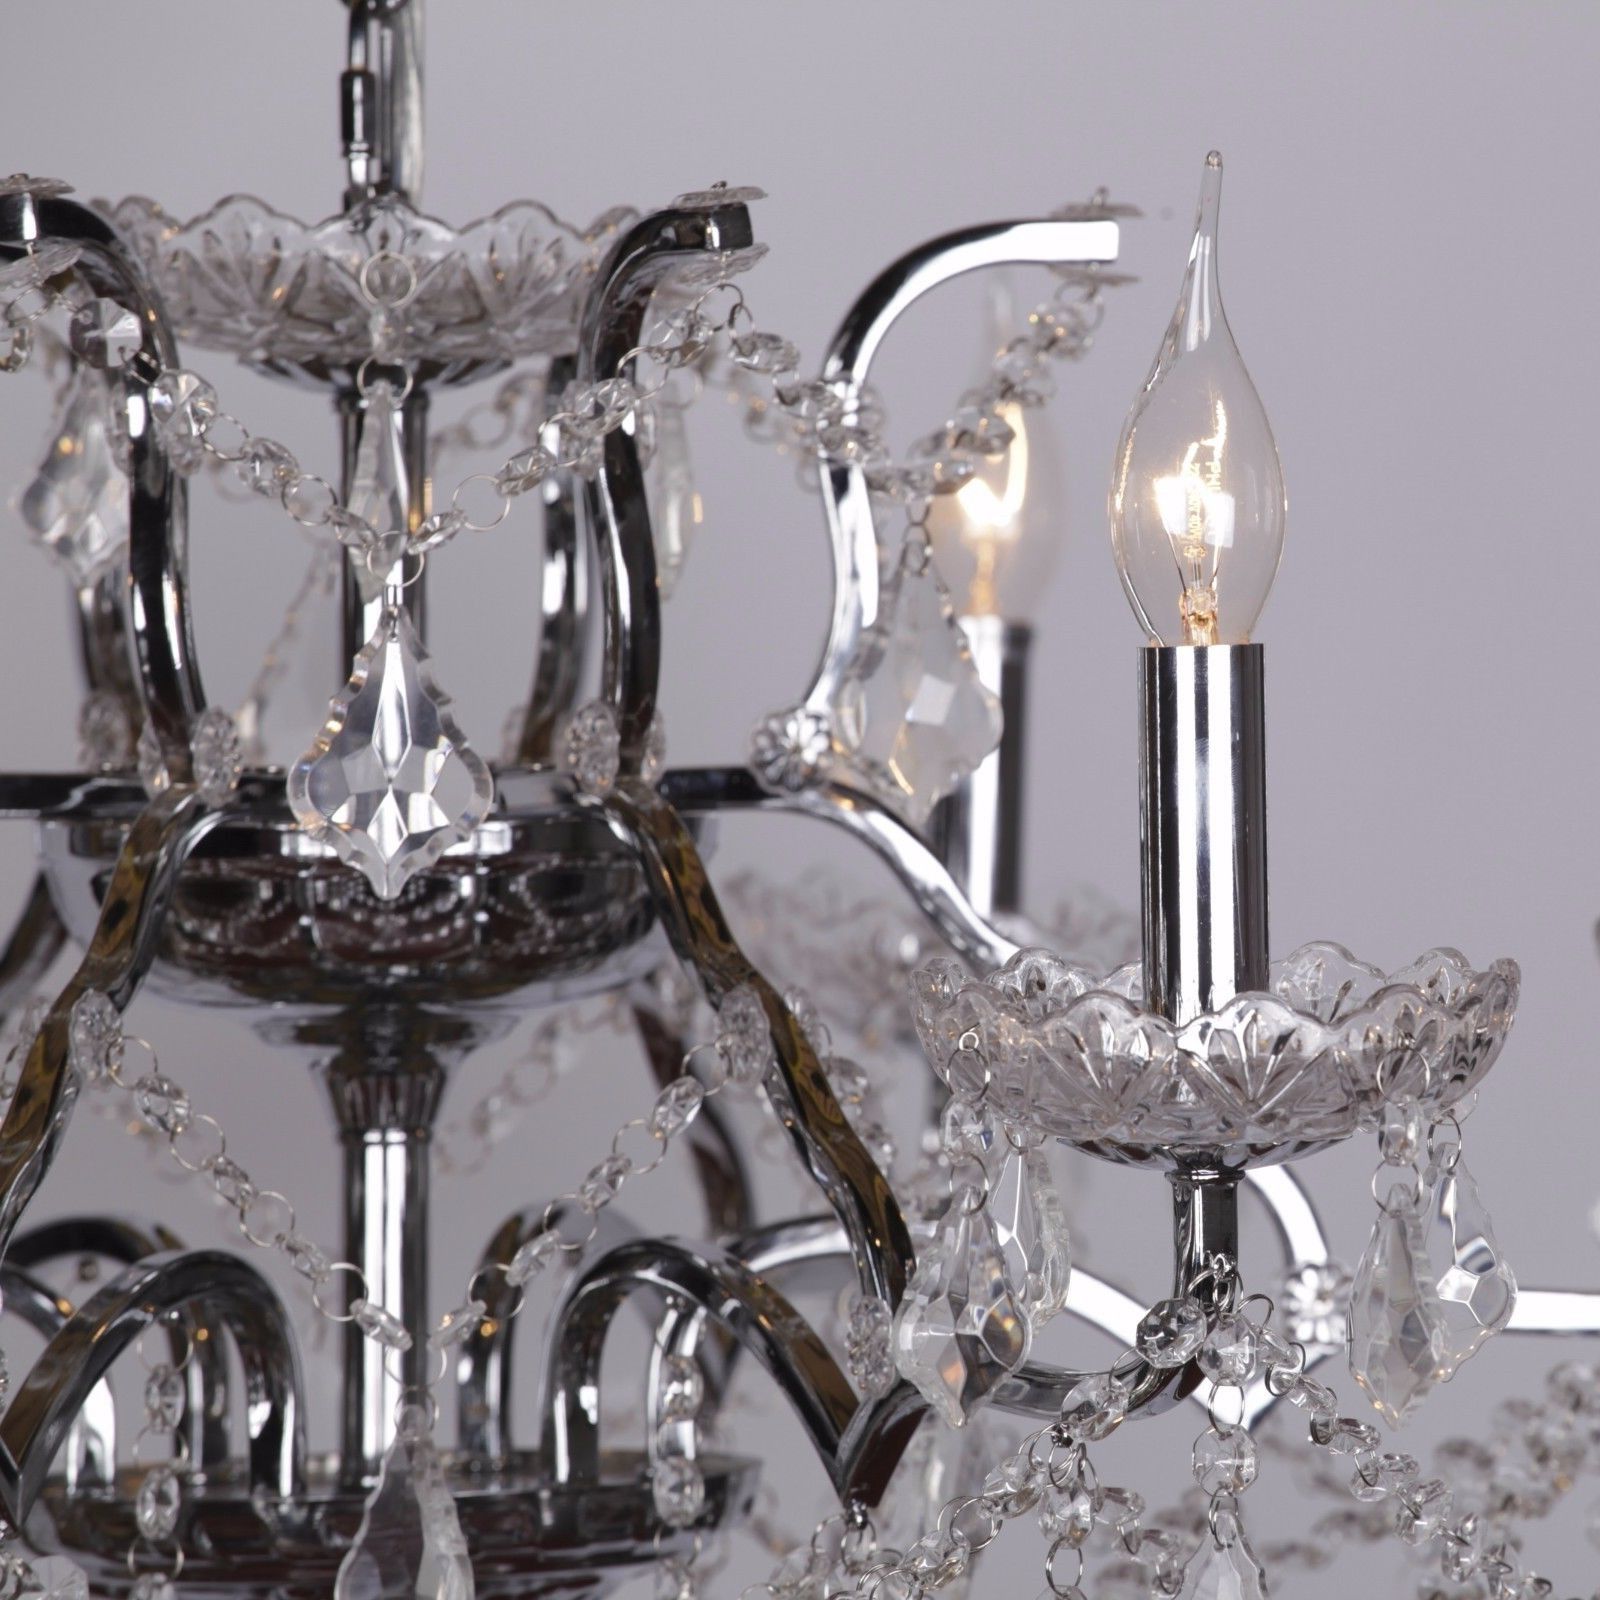 Latest Glass And Chrome Modern Chandeliers Intended For 6 Branch Chrome Shallow Cut Glass Chandelier Furniture (View 3 of 20)